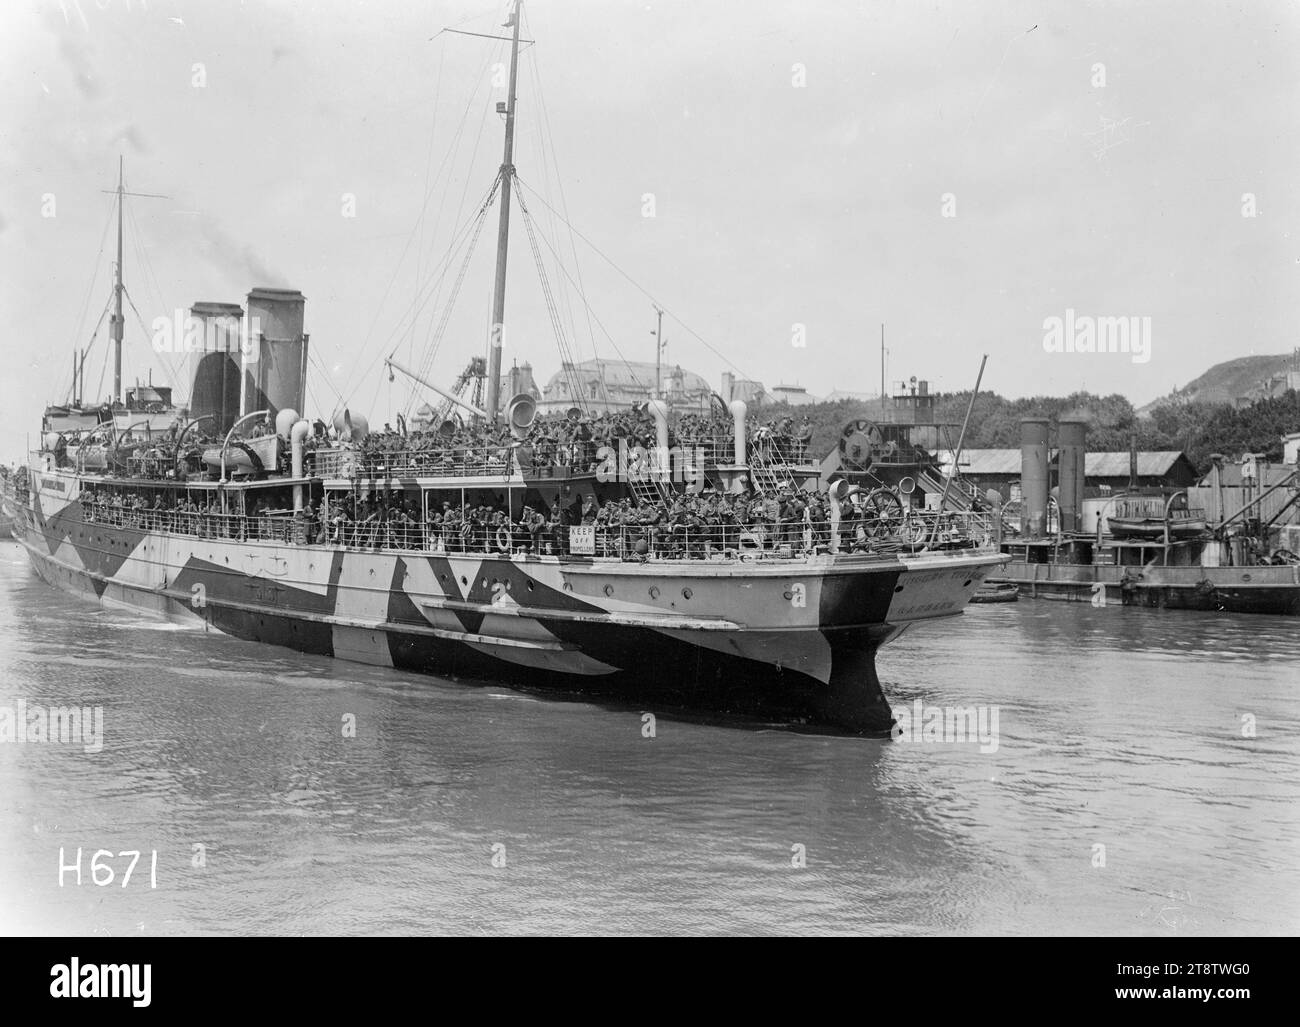 The Princess Victoria carrying Massey and Ward berthes at Boulogne, World War I, The 'Princess Victoria', the ship carrying Prime Minister William Massey and Deputy Prime Minister Sir Joseph Ward, berthing at Boulogne at the beginning of a ministerial visit to New Zealand troops in France during World War I. Photograph taken 29 June 1918 Stock Photo